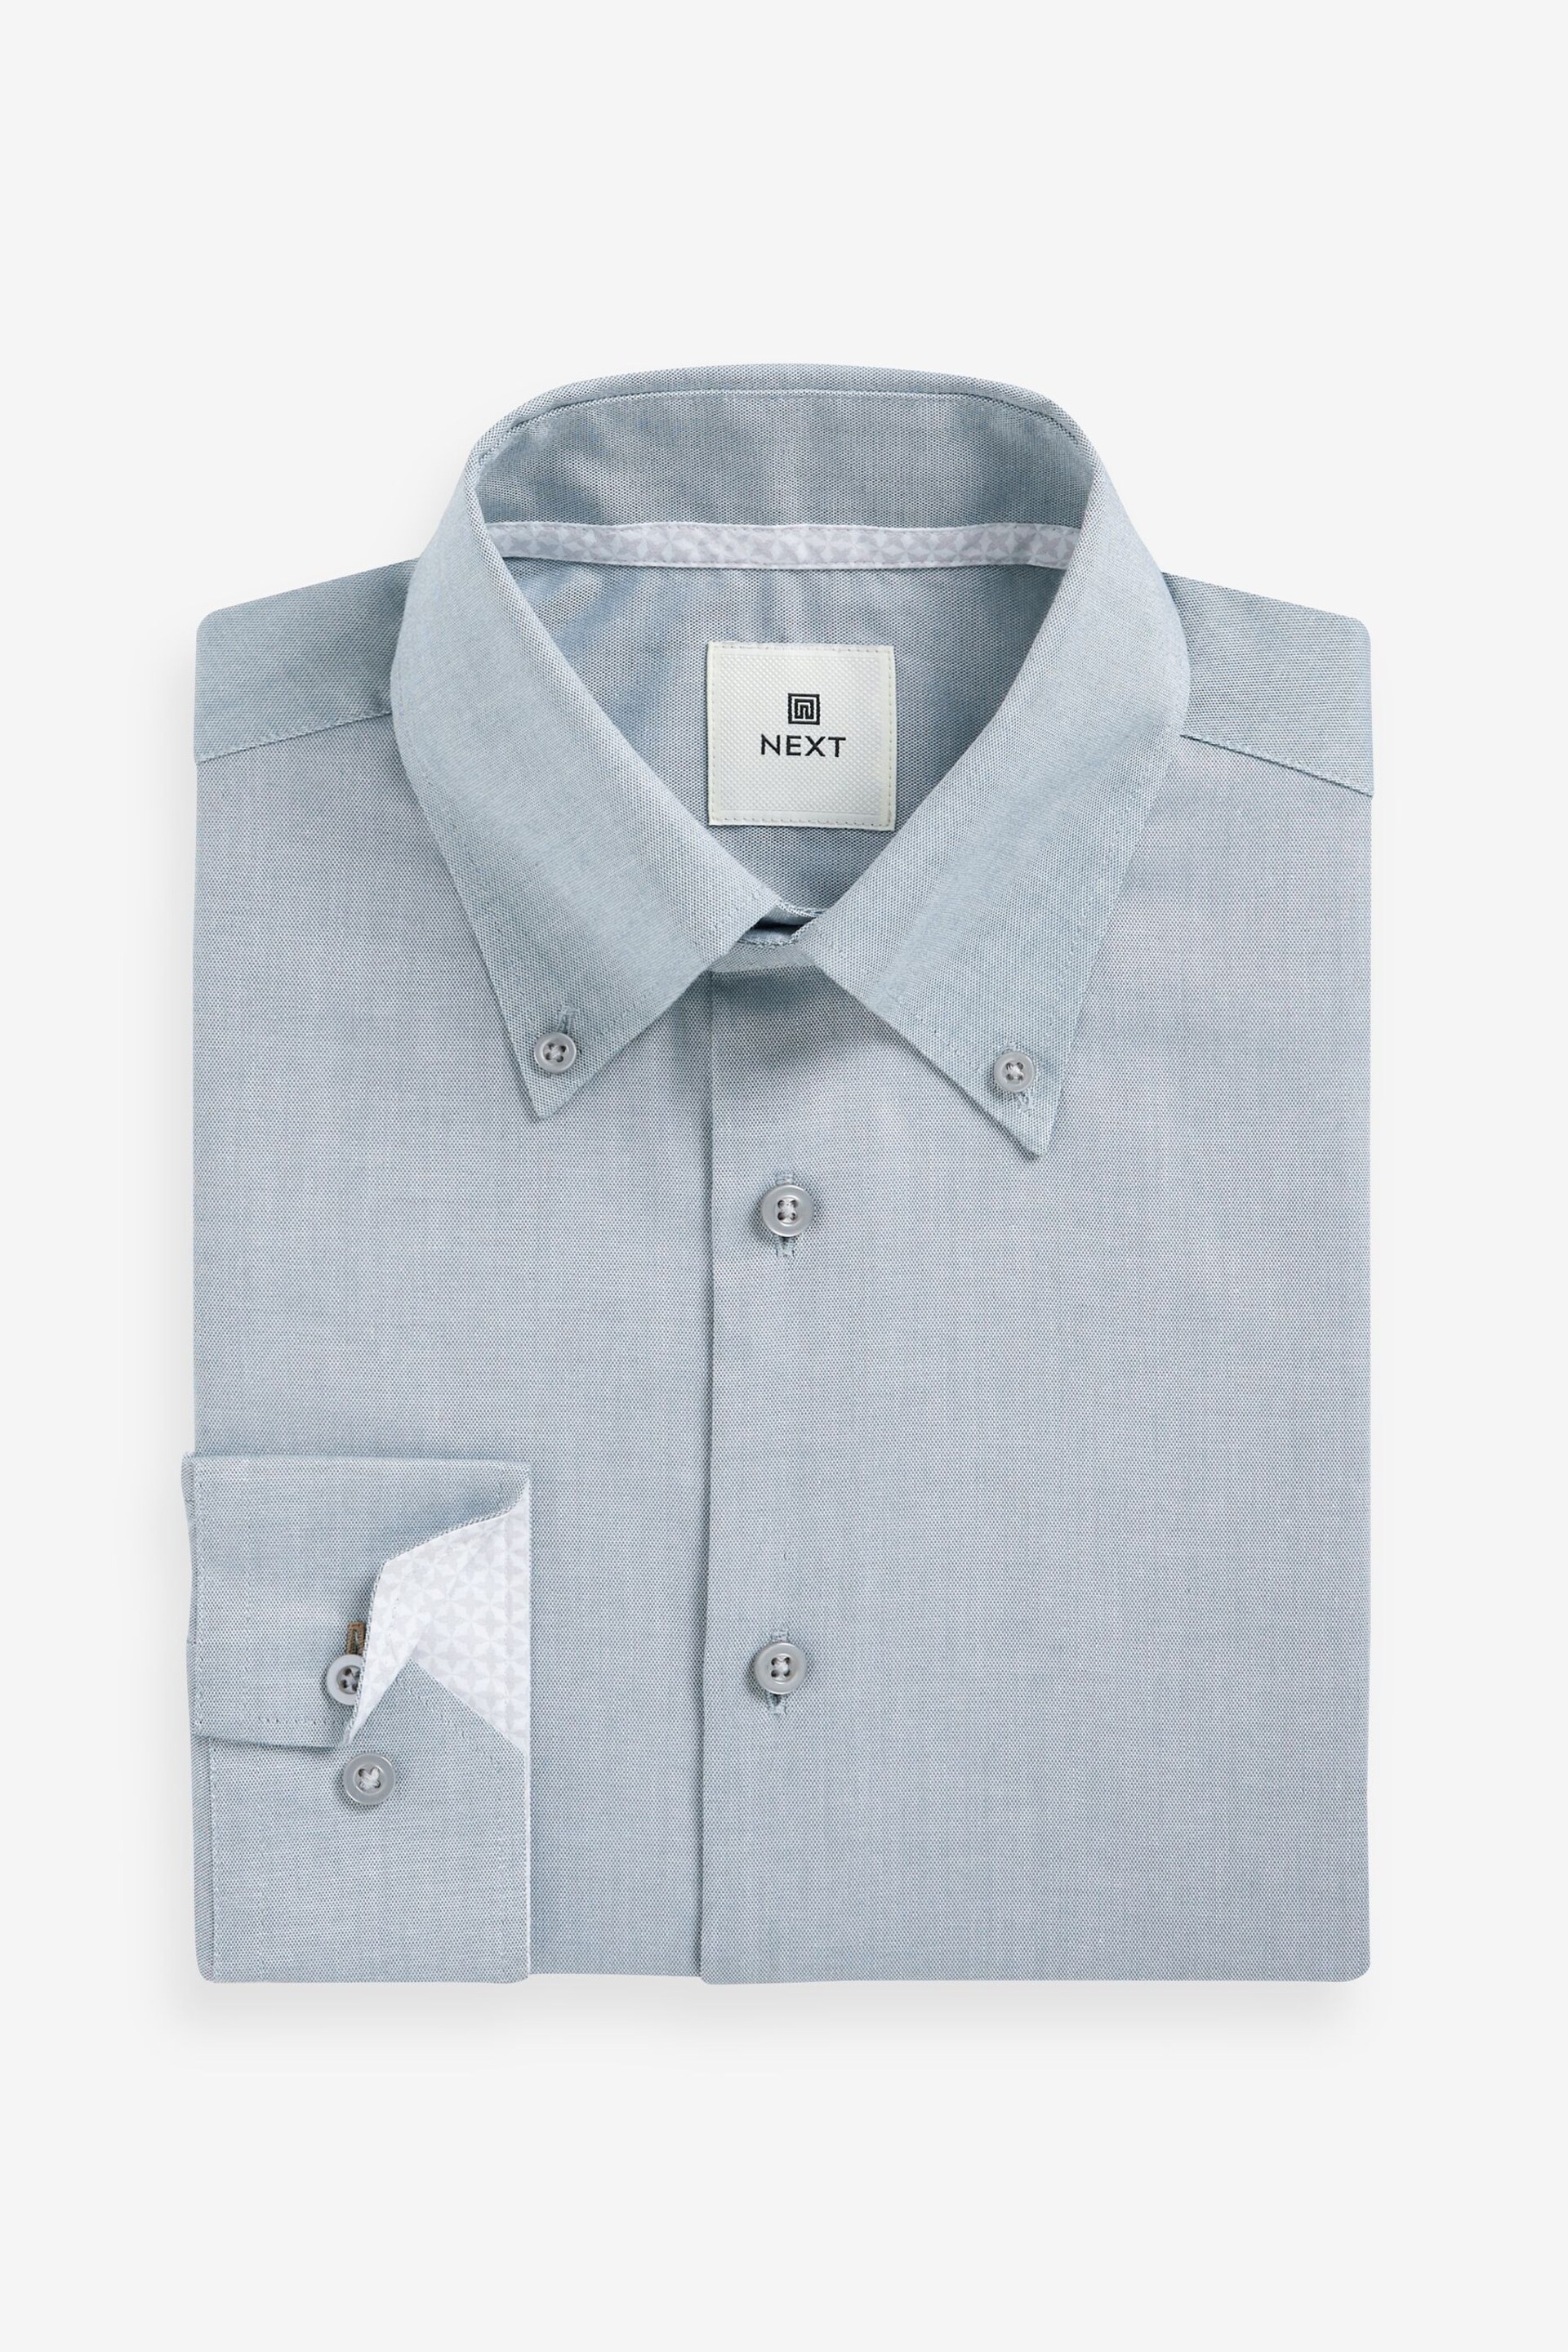 Green Oxford Single Cuff Textured Cotton Shirt - Image 6 of 8